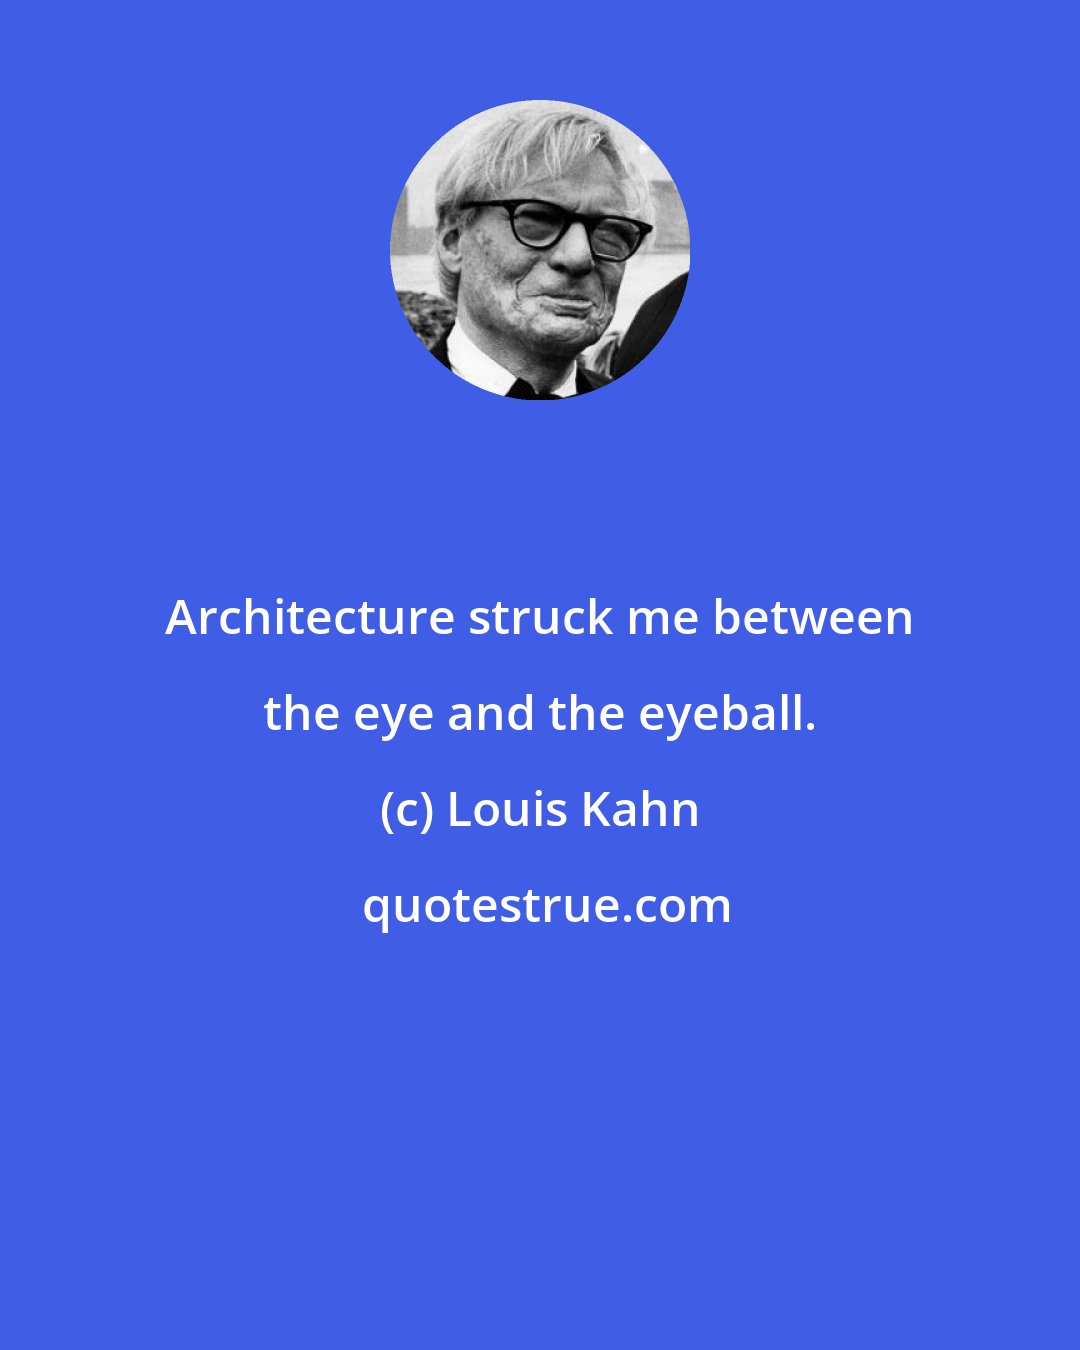 Louis Kahn: Architecture struck me between the eye and the eyeball.